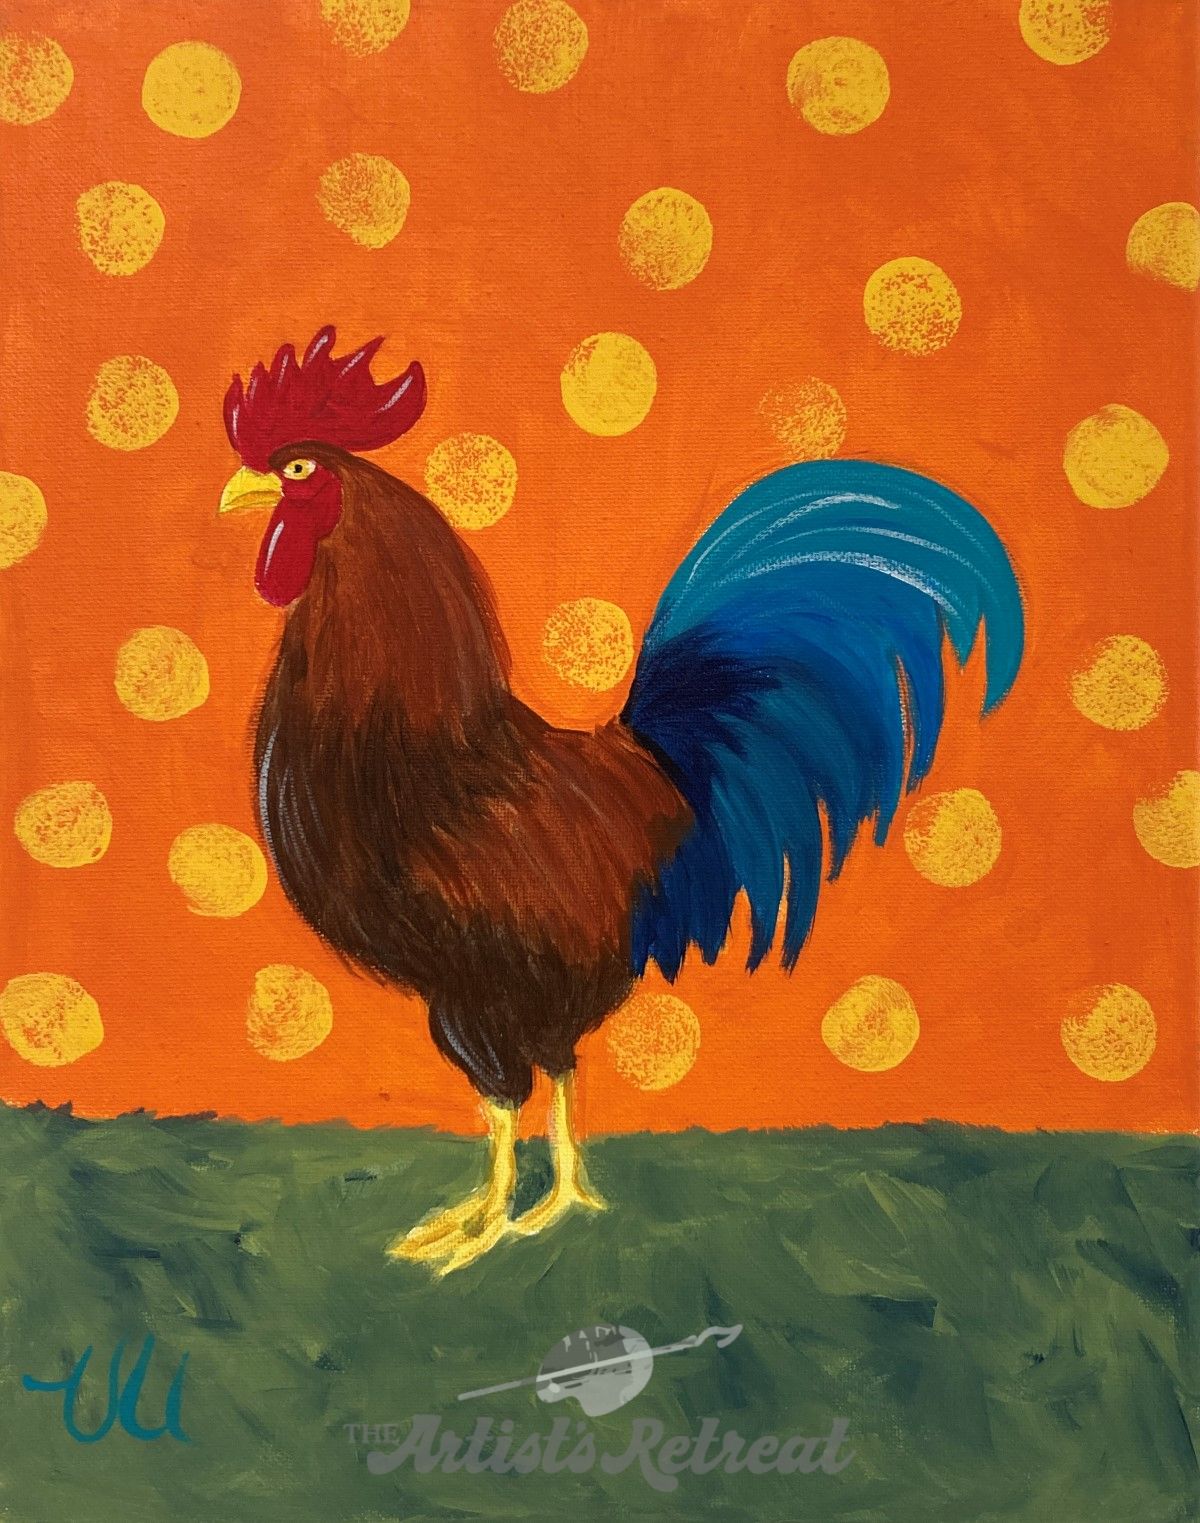 Roosty the Rooster - The Artist's Retreat